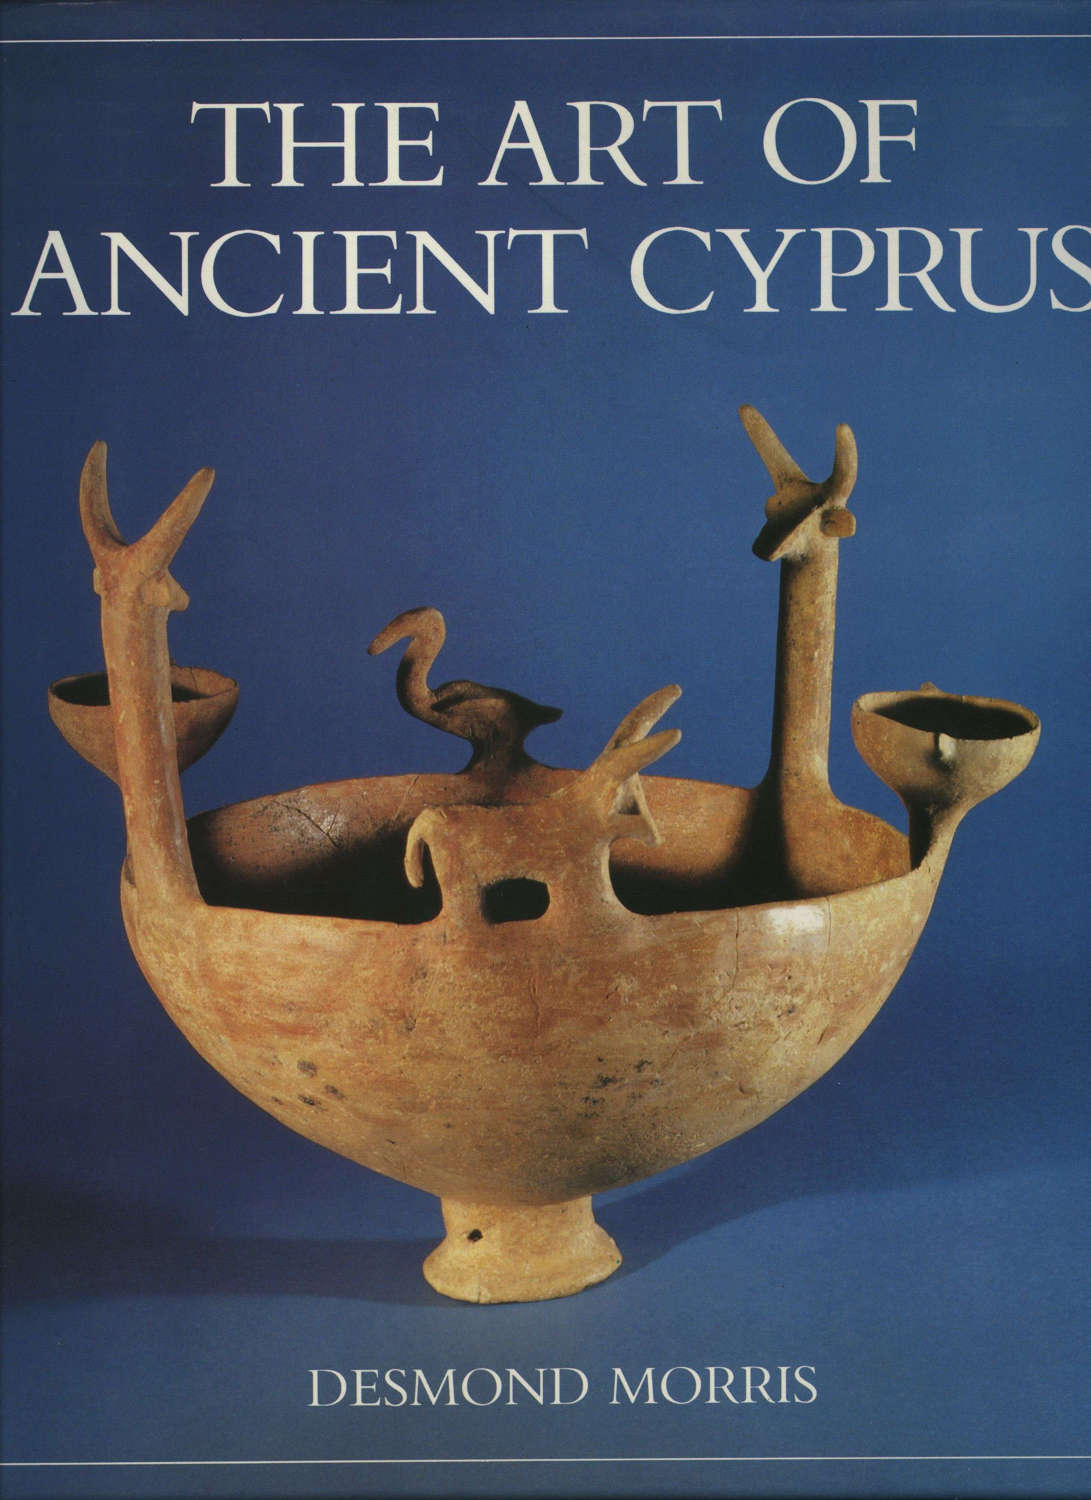 'The Art of Ancient Cyprus' by Desmond Morris